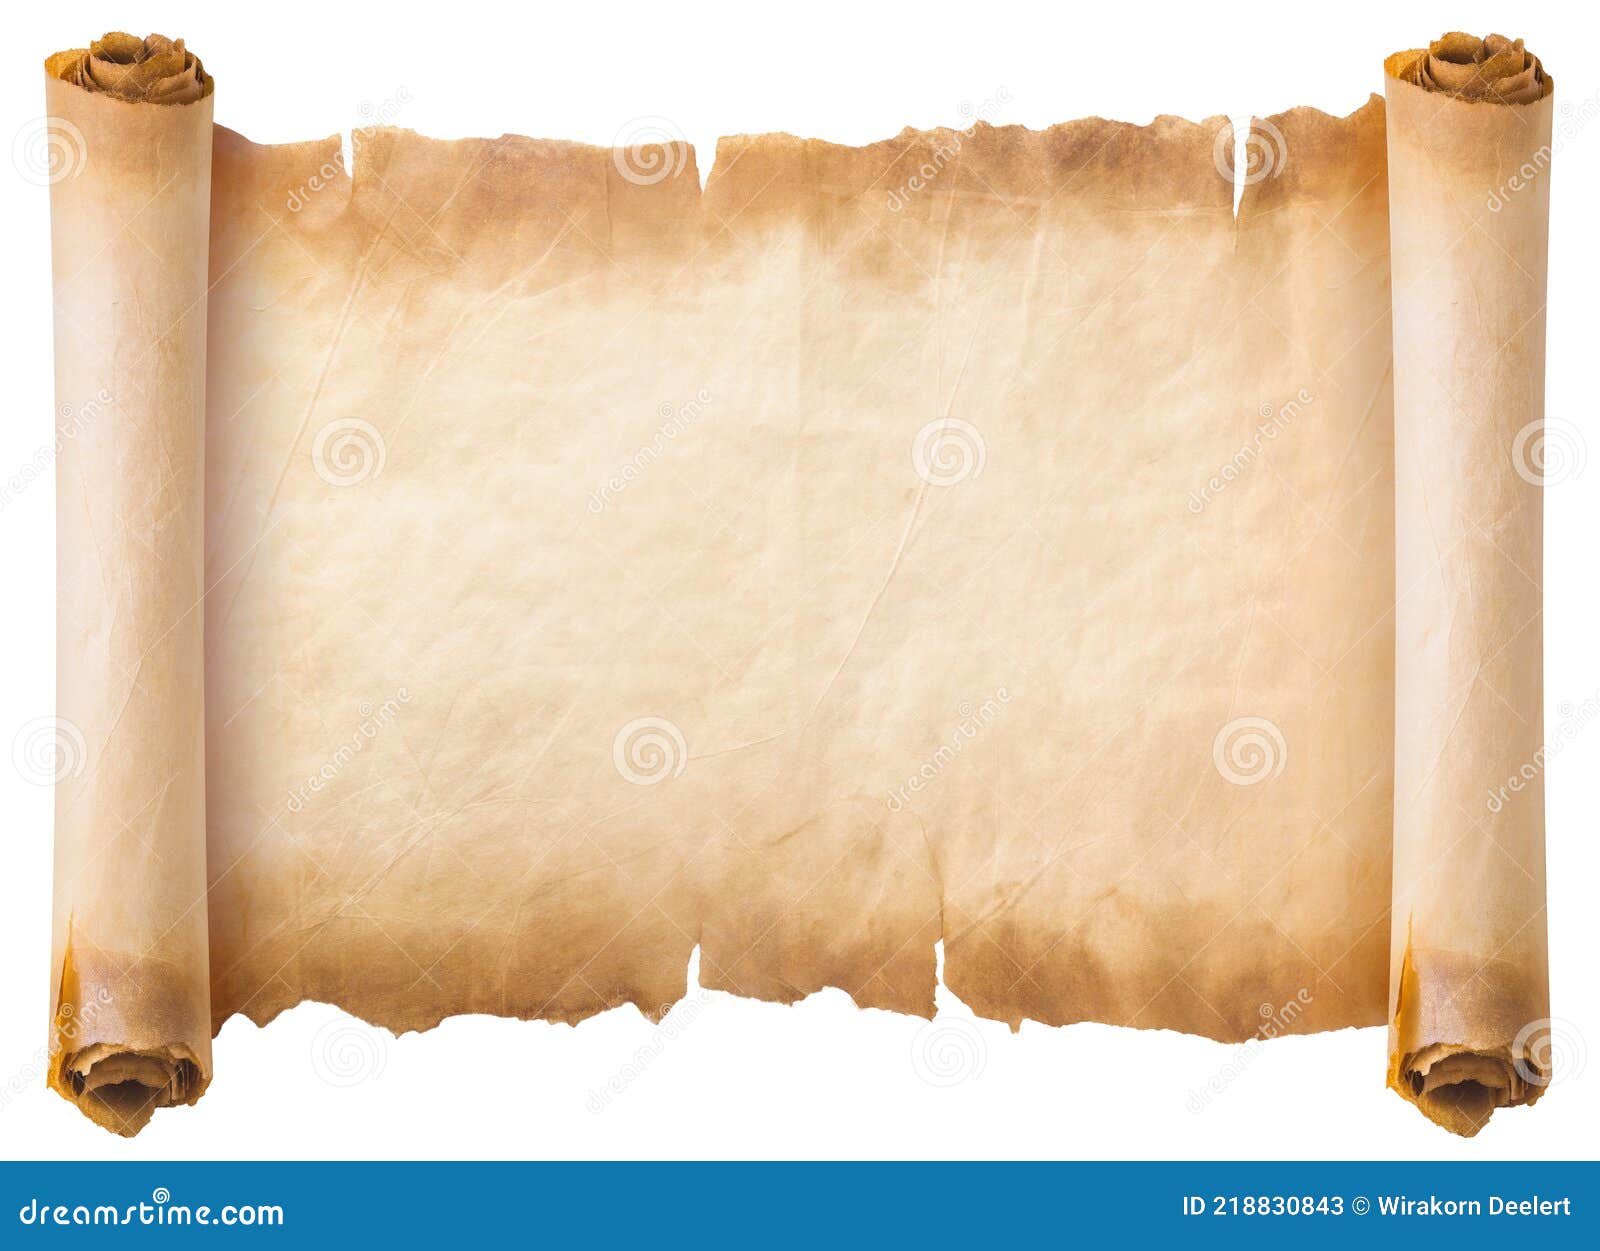 Old Parchment Paper Scroll Sheet Vintage Aged or Texture Isolated on White  Background Stock Image - Image of roll, pattern: 218830843